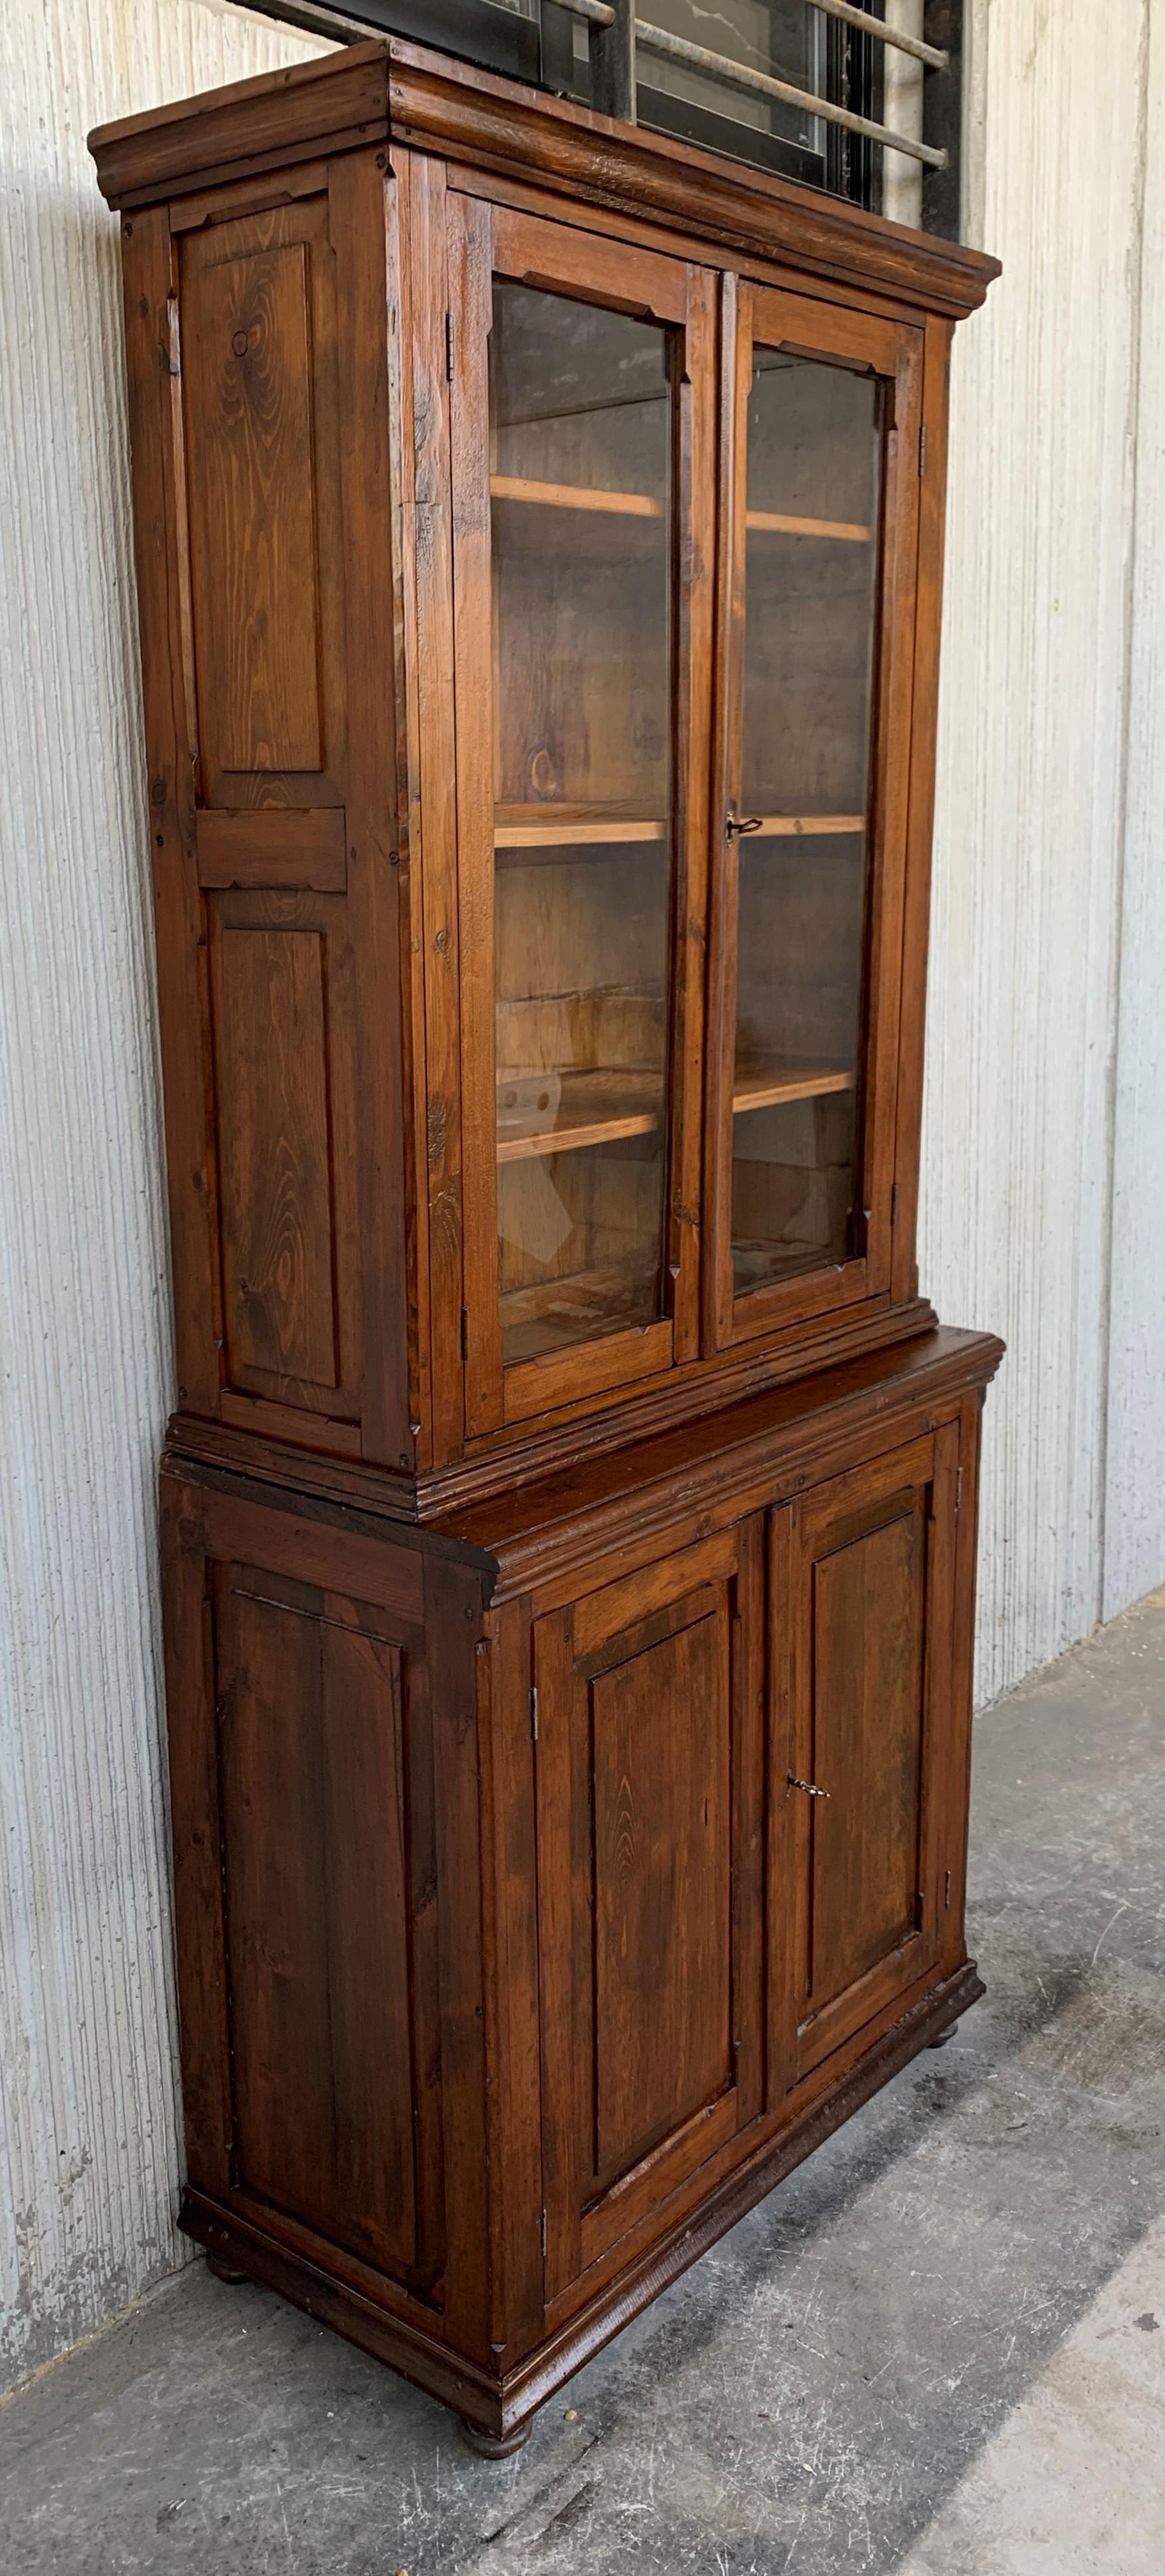 Spanish Colonial 19th Century Spanish Vitrine, Bookcase Tallboy Cabinet with Glass Doors